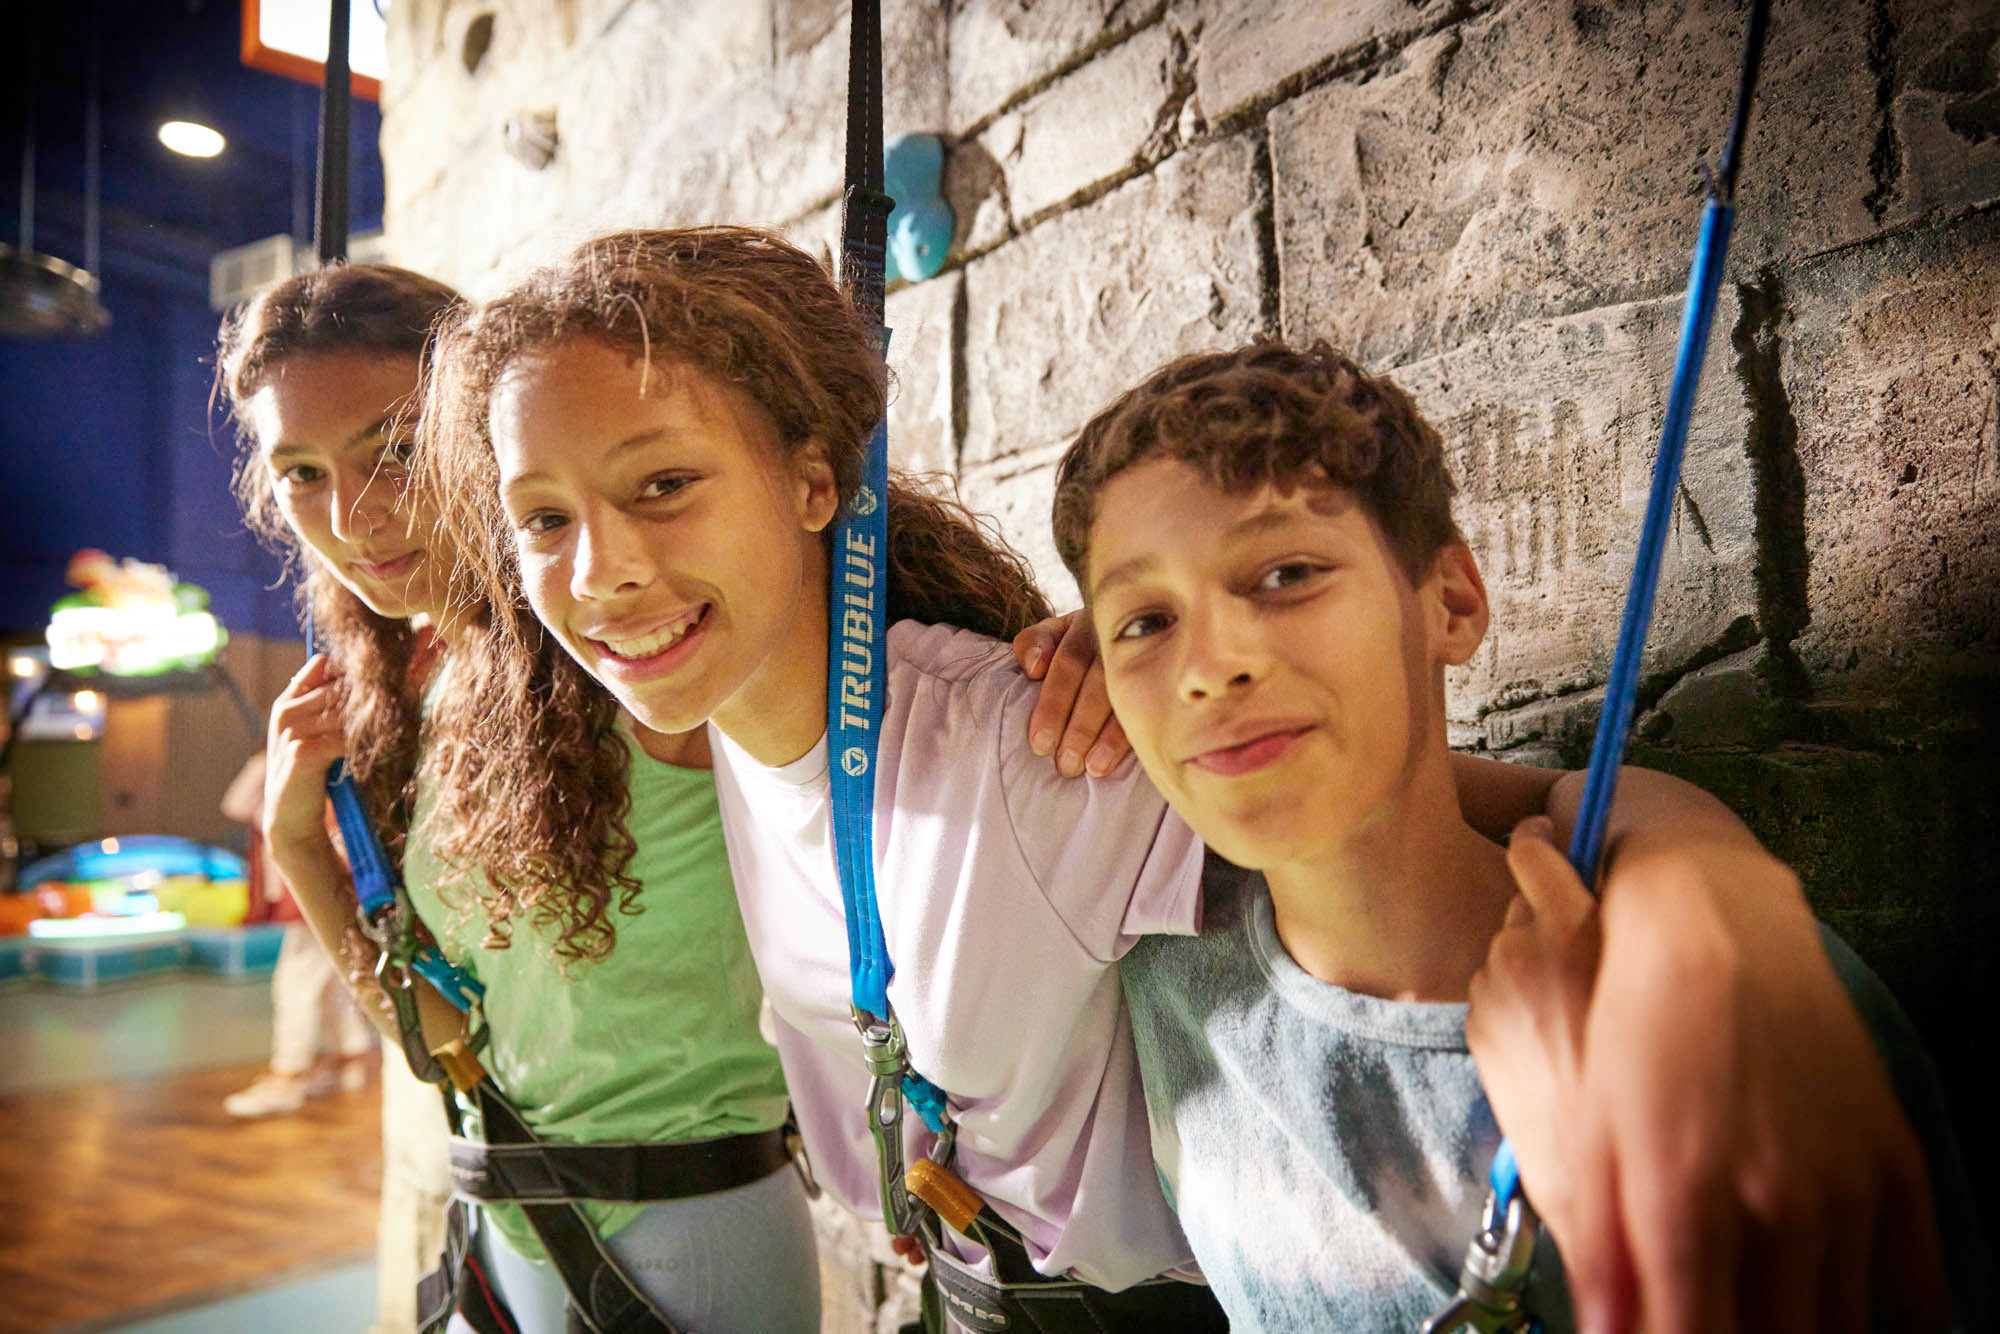 3 children smiling in front of climbing wall